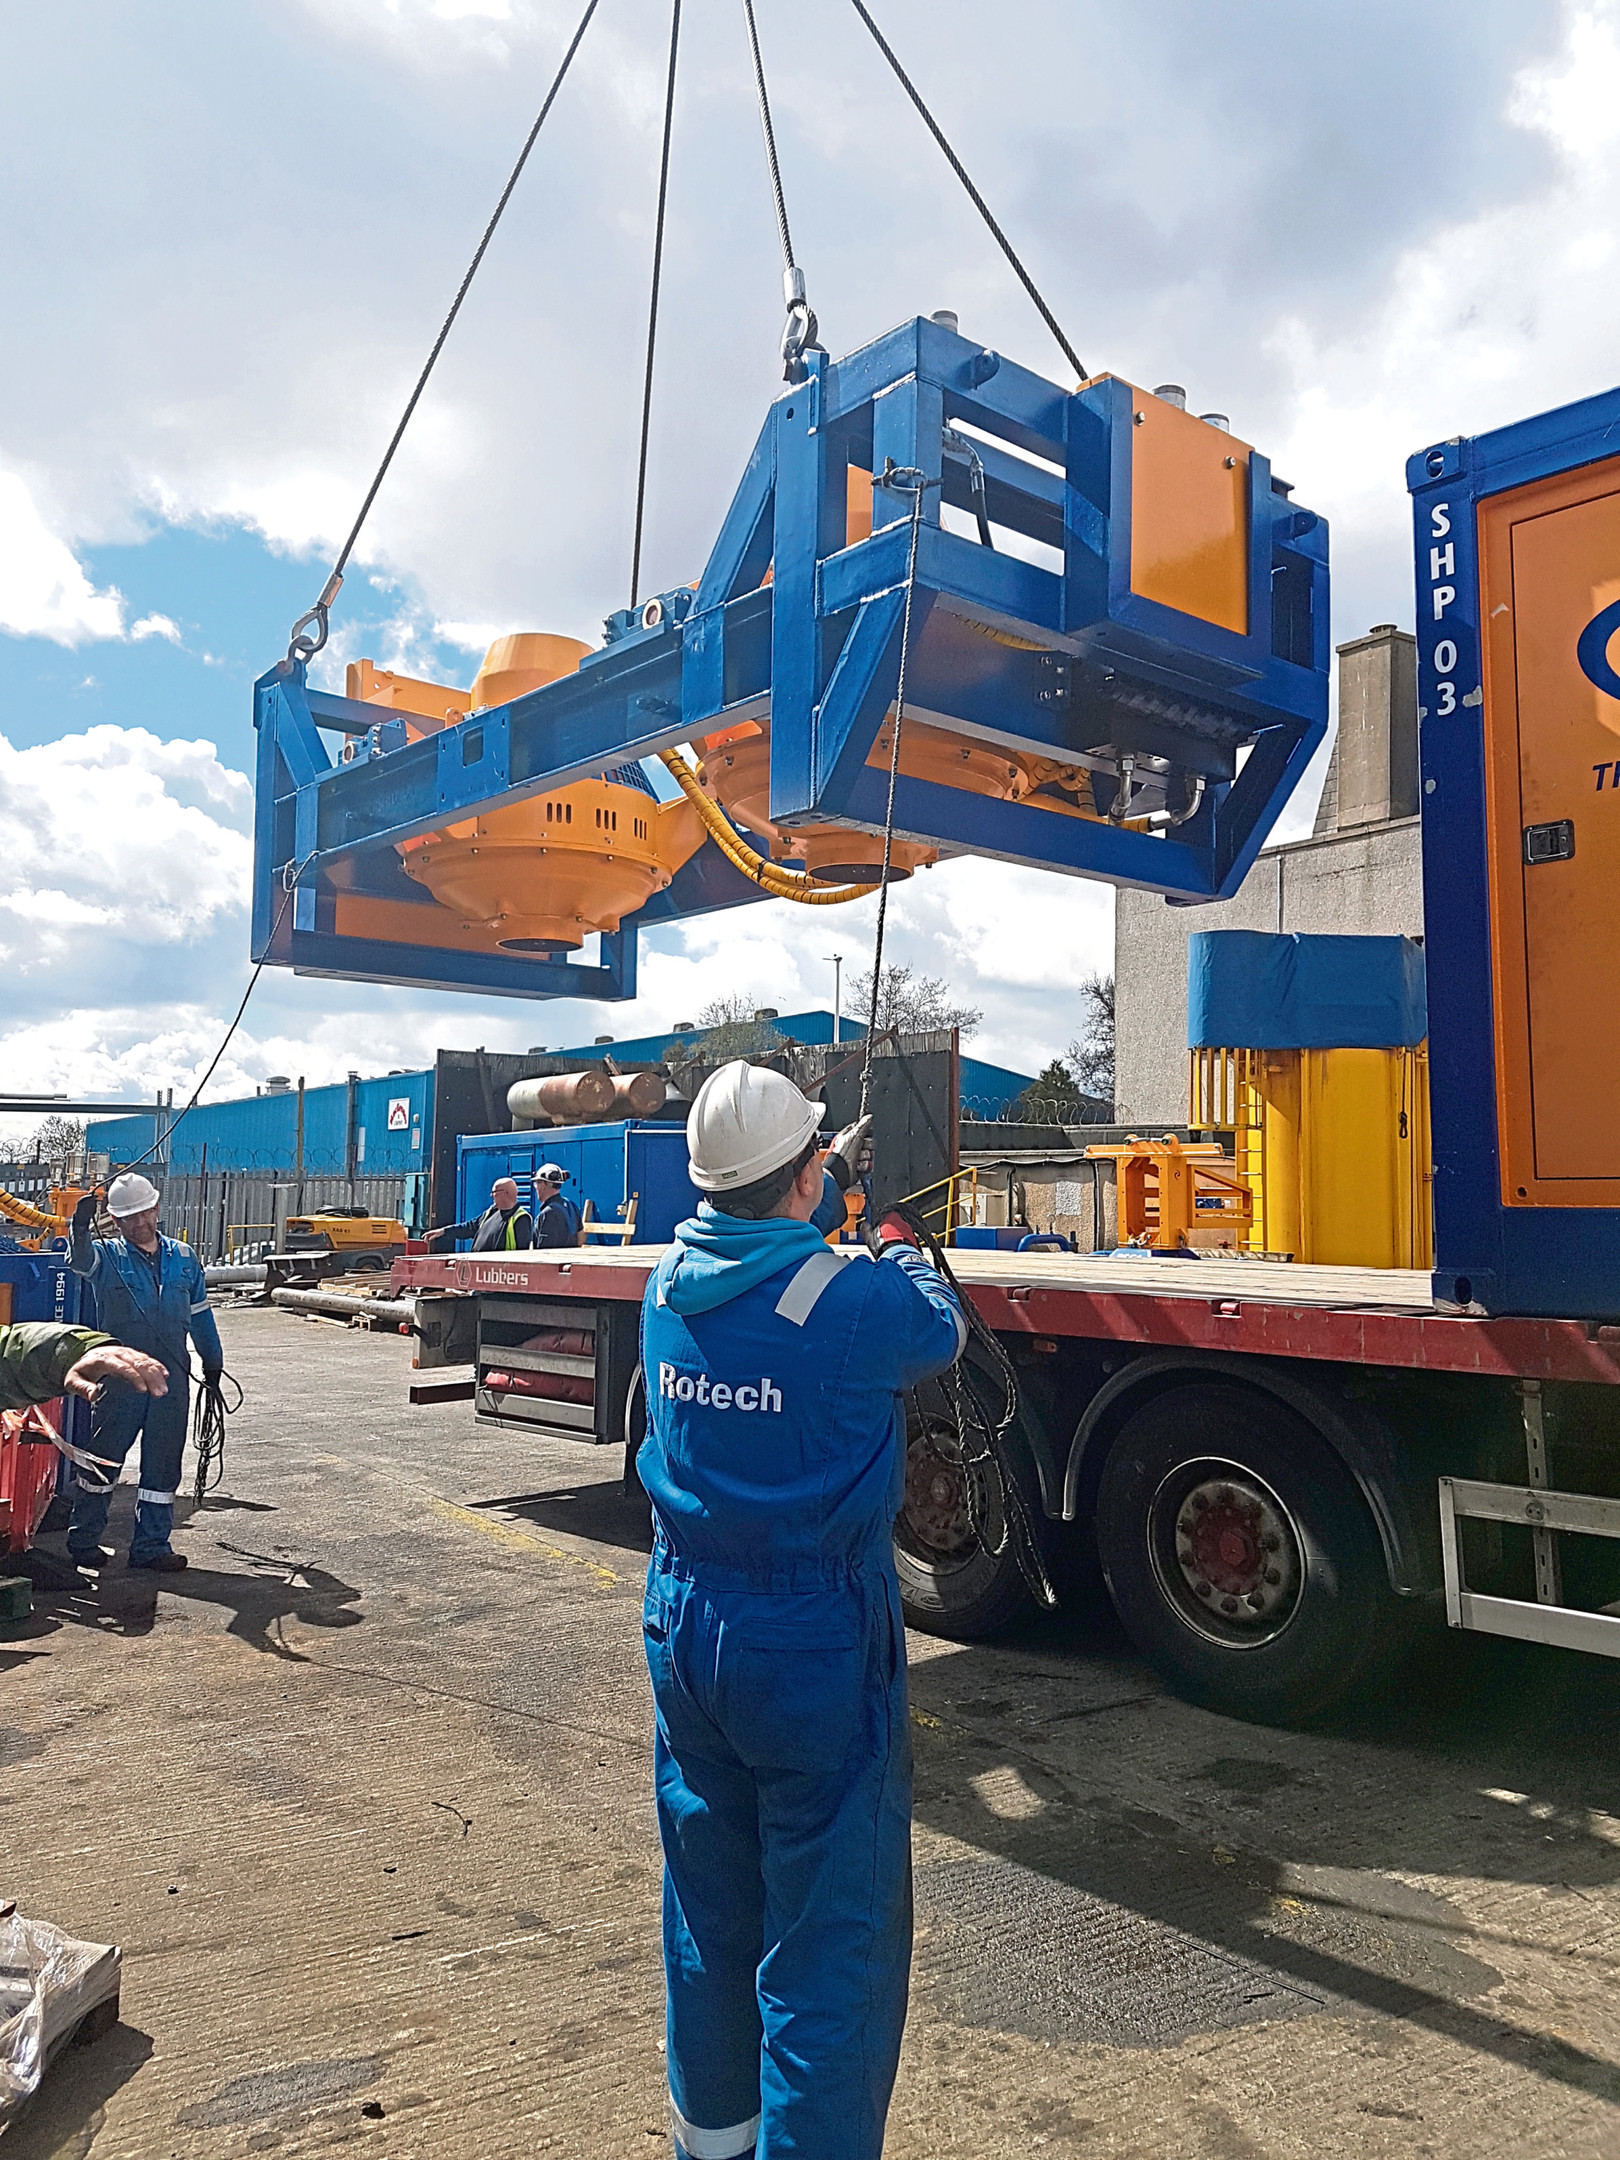 Rotech Subsea’s milestone 500th project